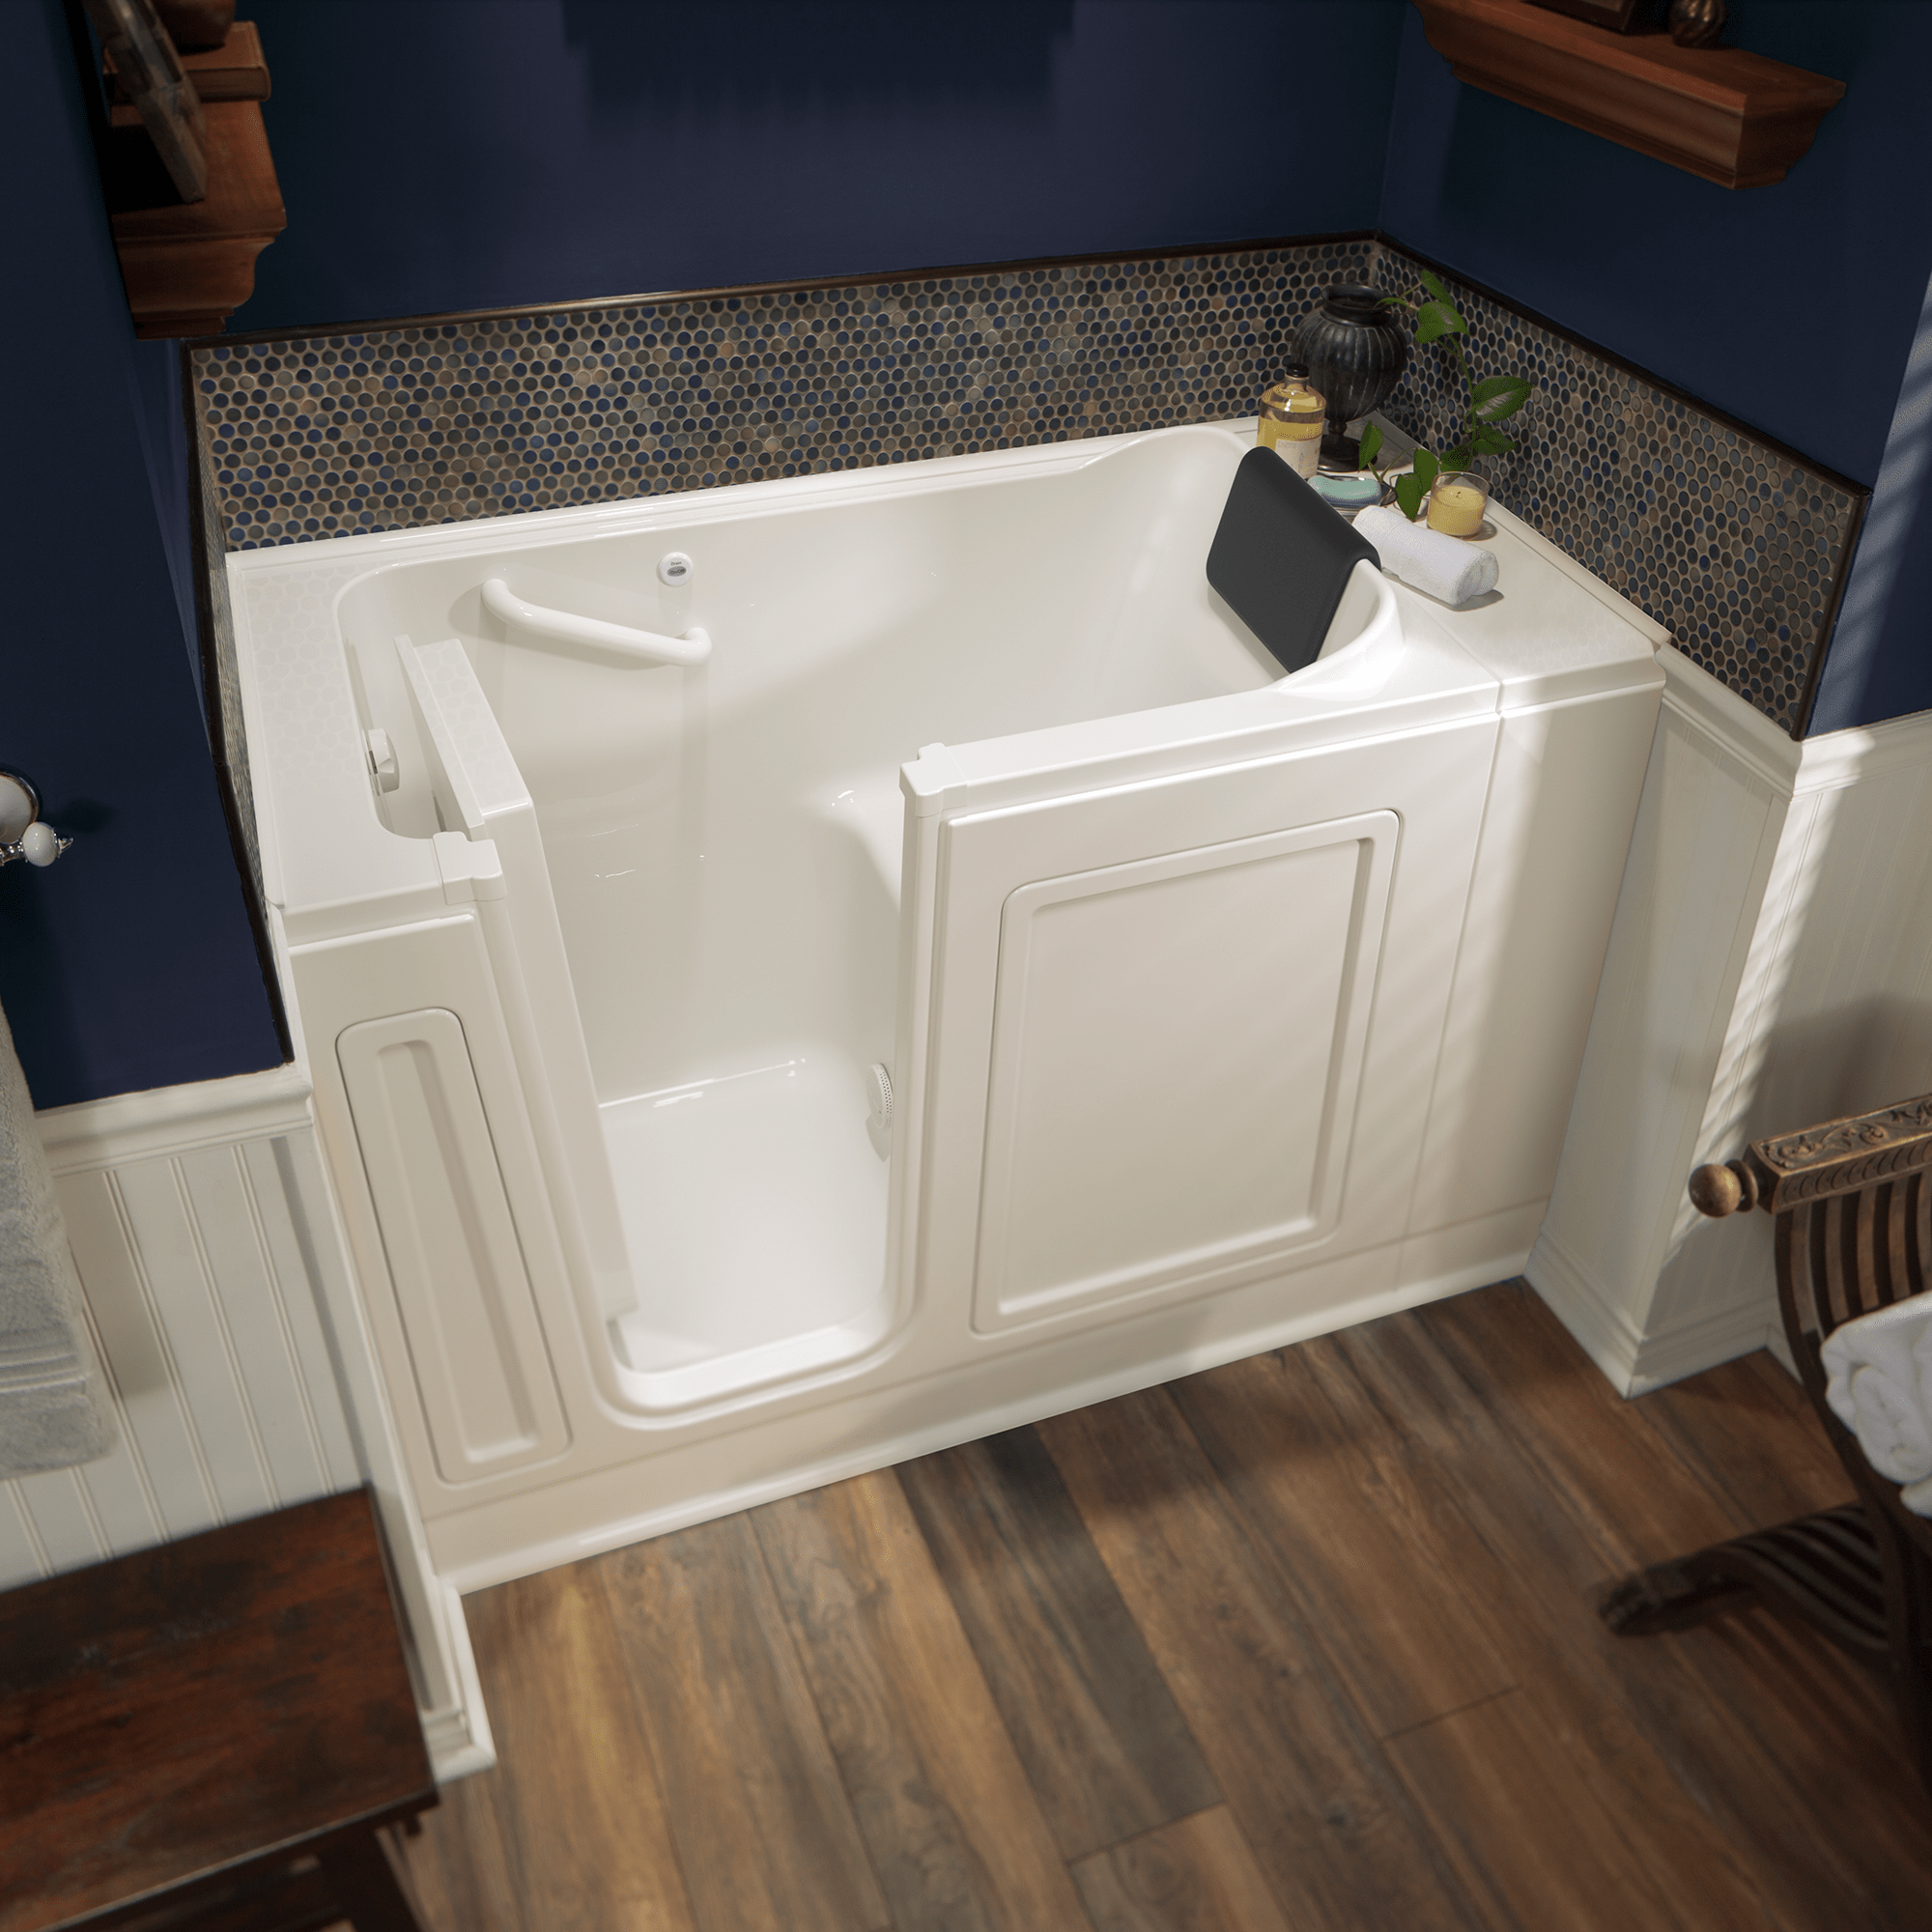 Acrylic Luxury Series 28 x 48-Inch Walk-in Tub With Soaker System - Left-Hand Drain